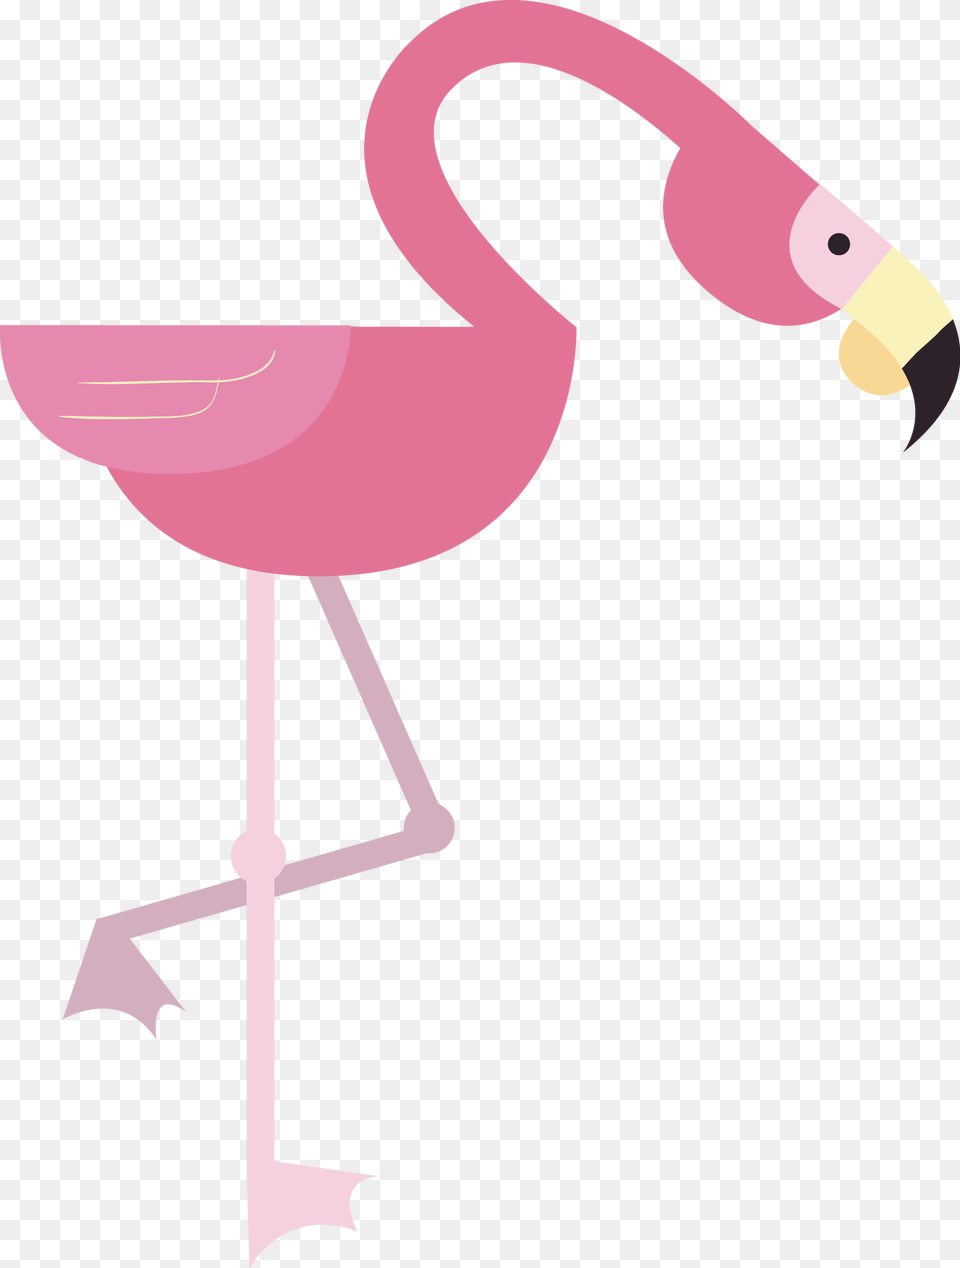 Drawing Animation Style Flamingos Cch V Con Hng Hc, Animal, Bird, Flamingo Free Transparent Png